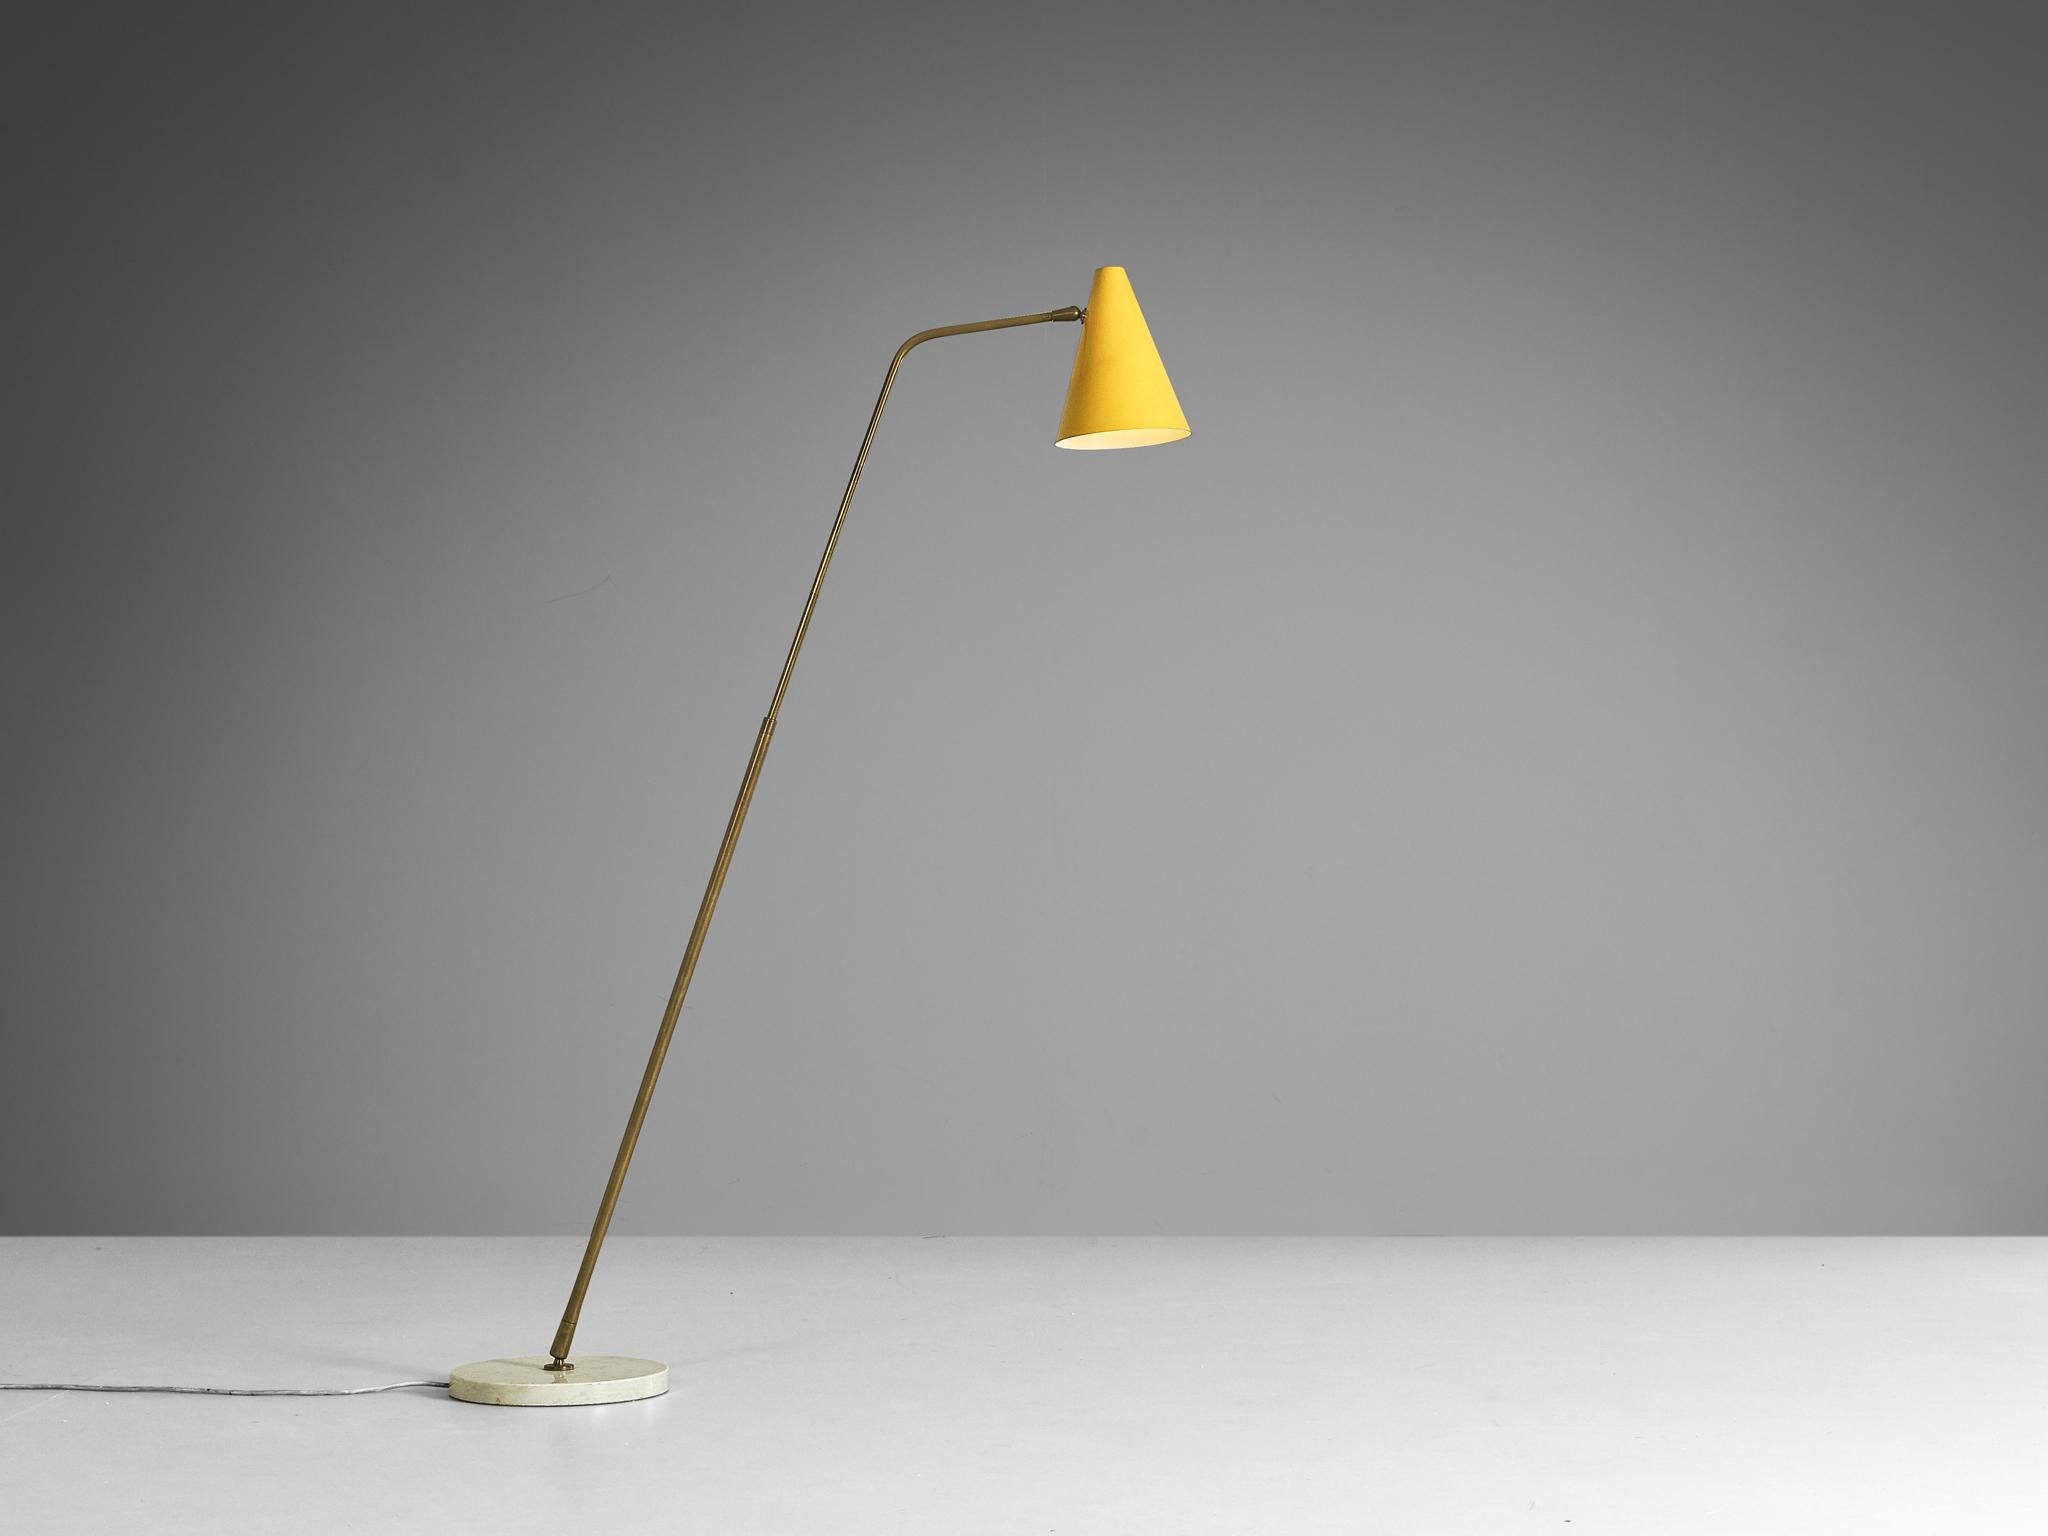 Angelo Ostuni for O-Luce, floor lamp, model '312 V2', Carrara marble, brass, coated aluminum, Italy, 1949

This floor lamp is designed by the influential designer in the field of lighting design Angelo Ostuni in 1949 which his brother Giuseppe took